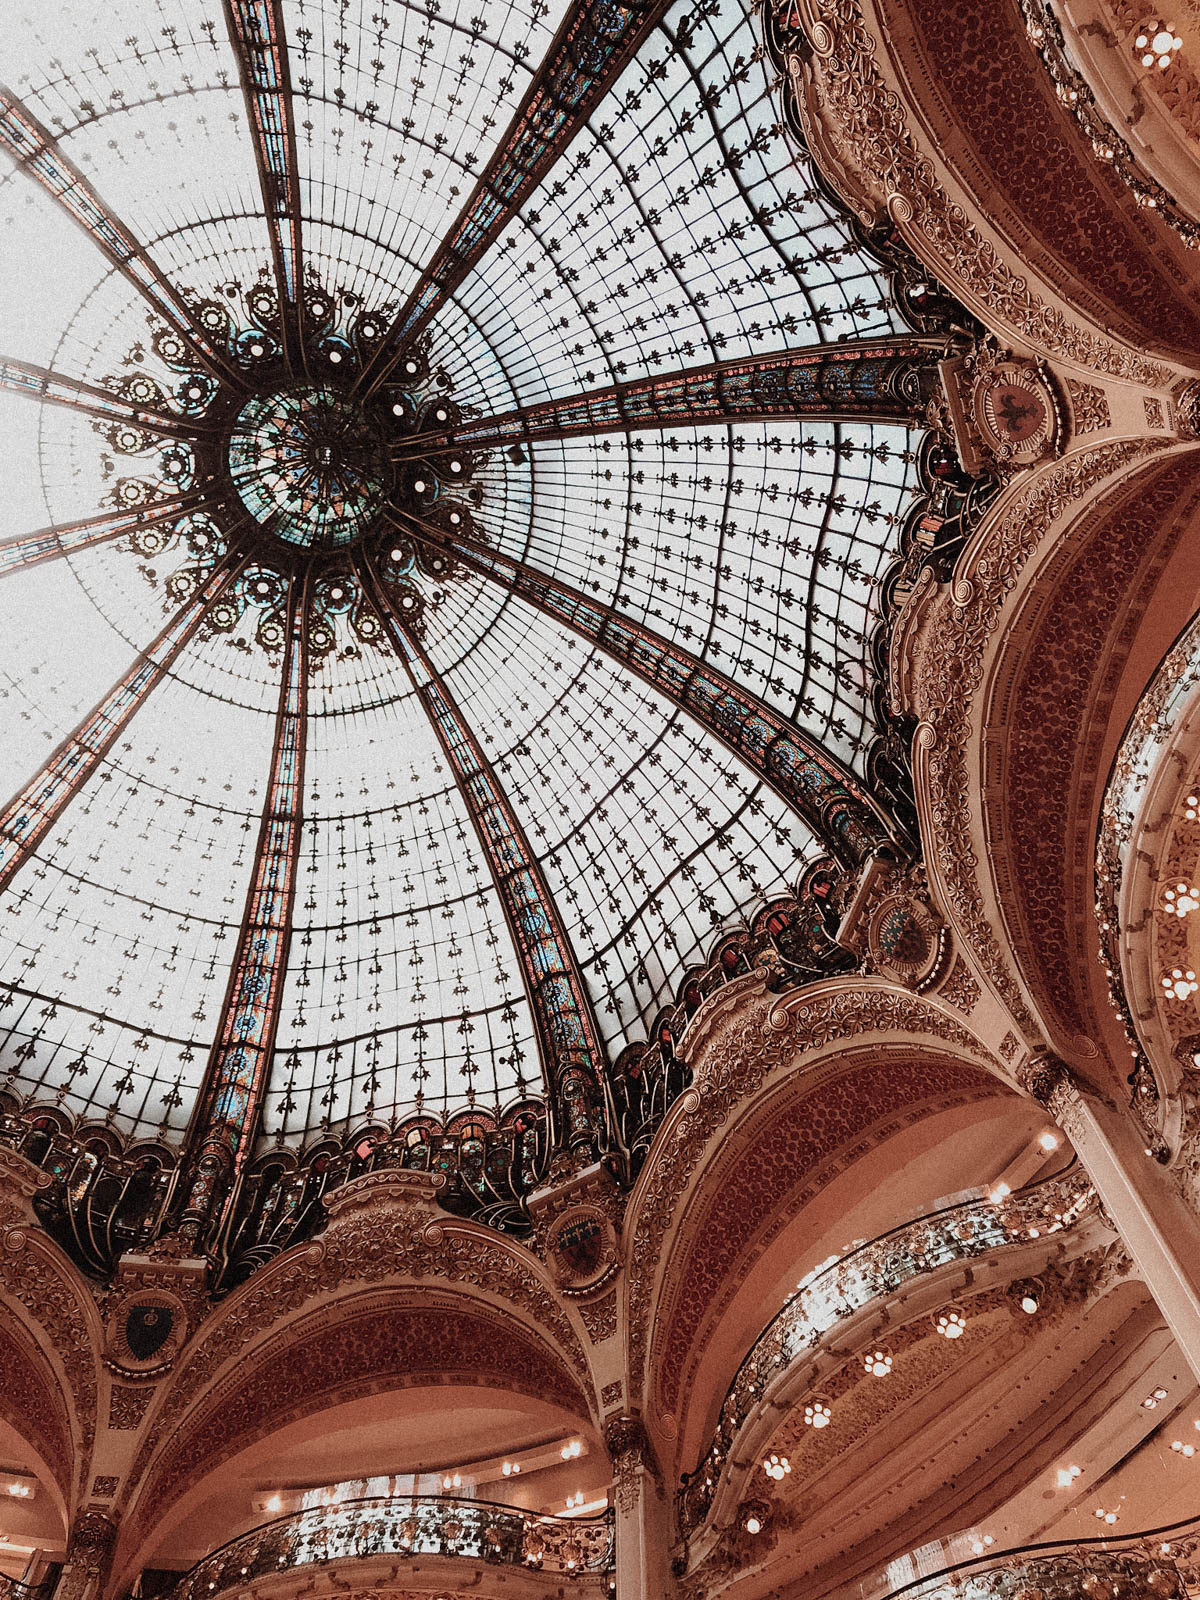 Paris France Travel Guide - Gallery Lafayette Ceiling, European Architecture and Buildings / RG Daily Blog